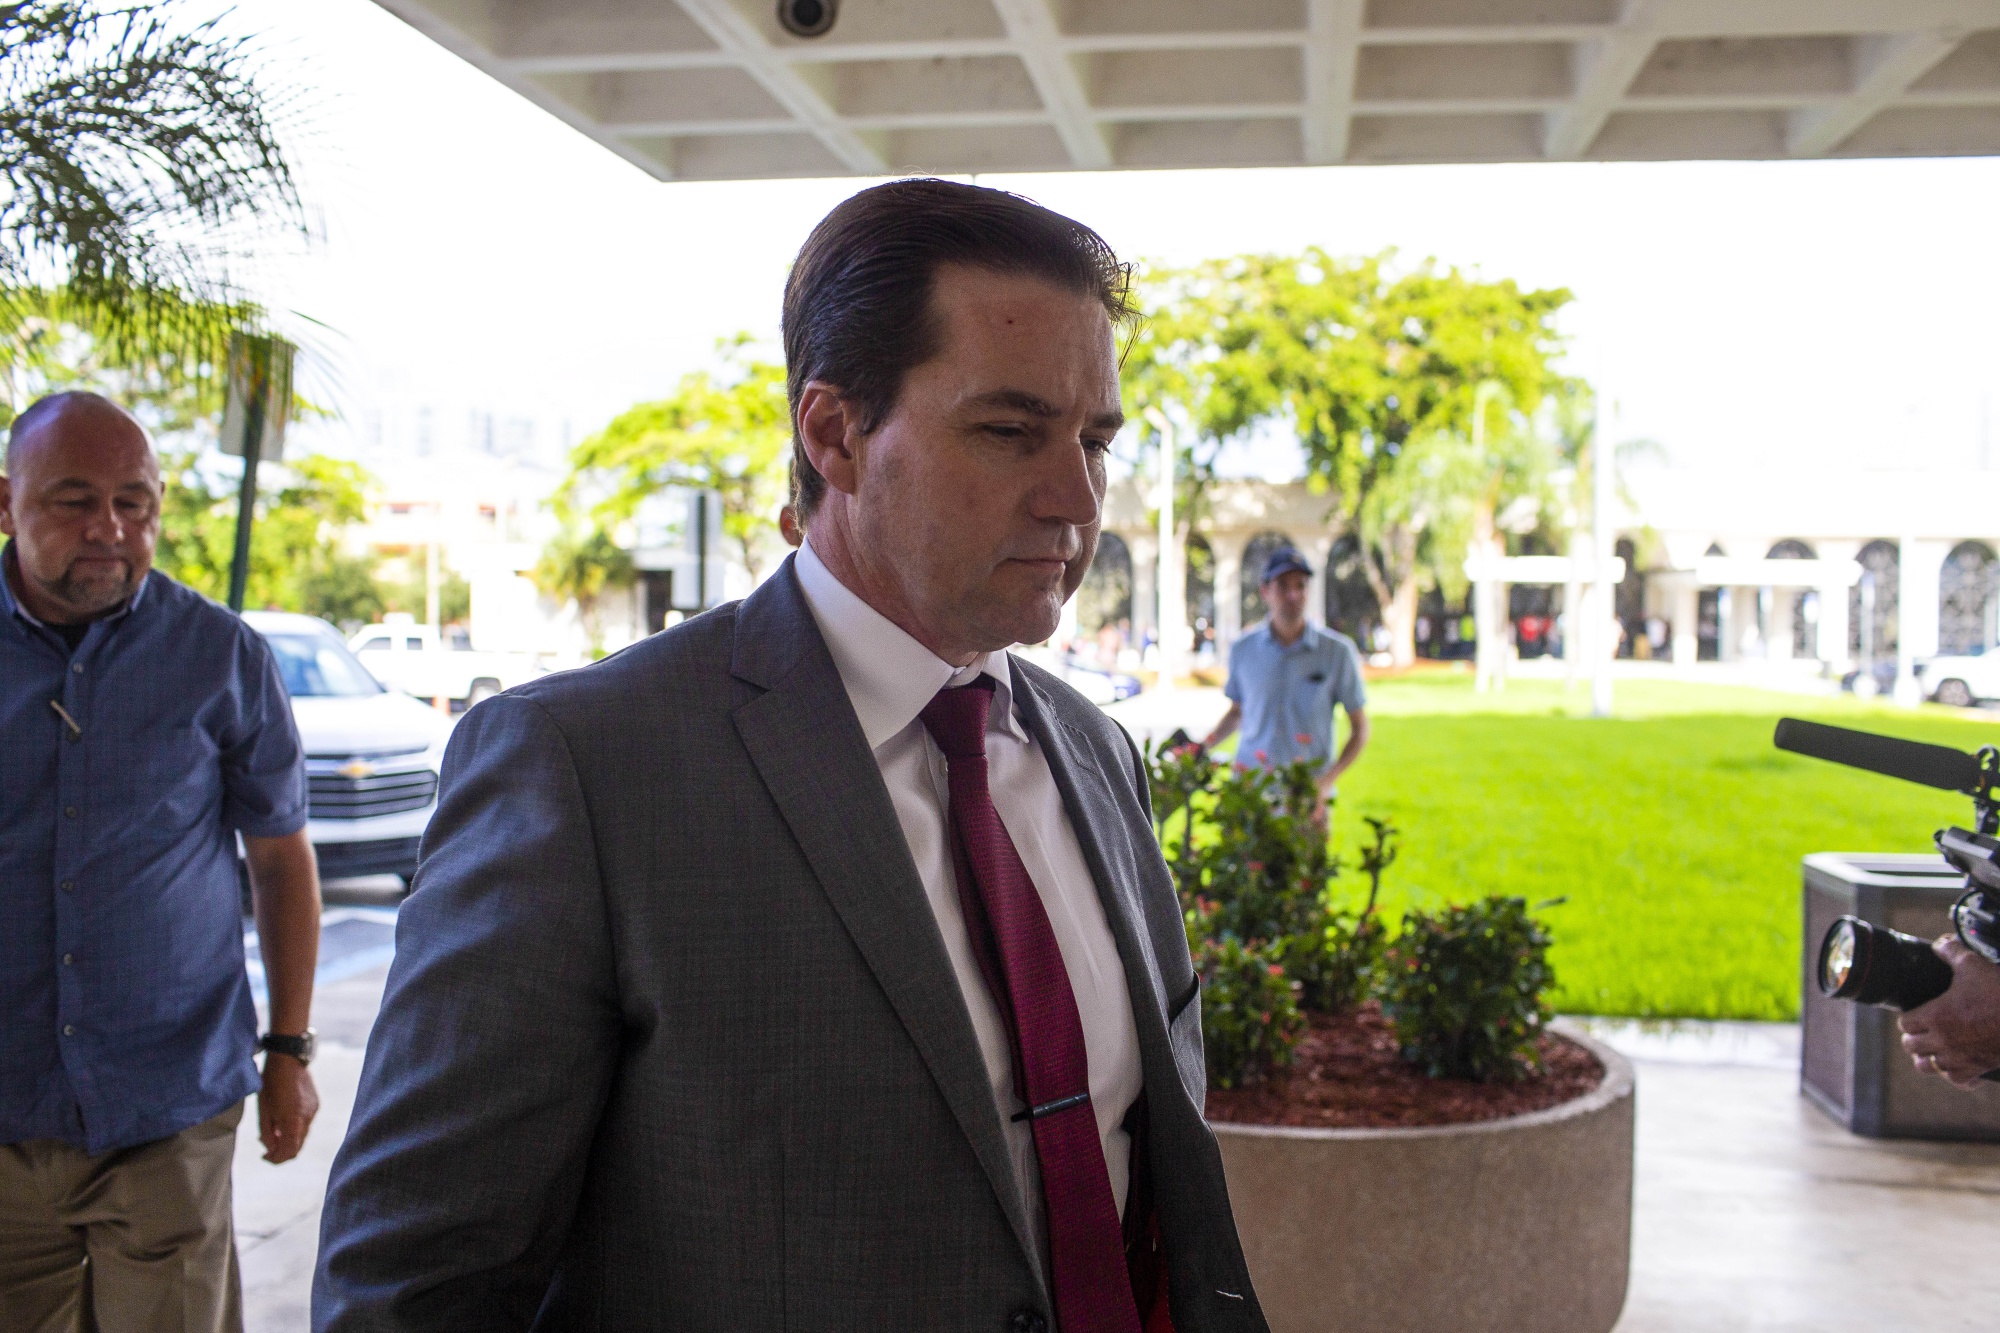 Craig Wright, self declared inventor of Bitcoin, arrives at federal court in West Palm Beach, Florida, U.S., on Friday, June 28, 2019.